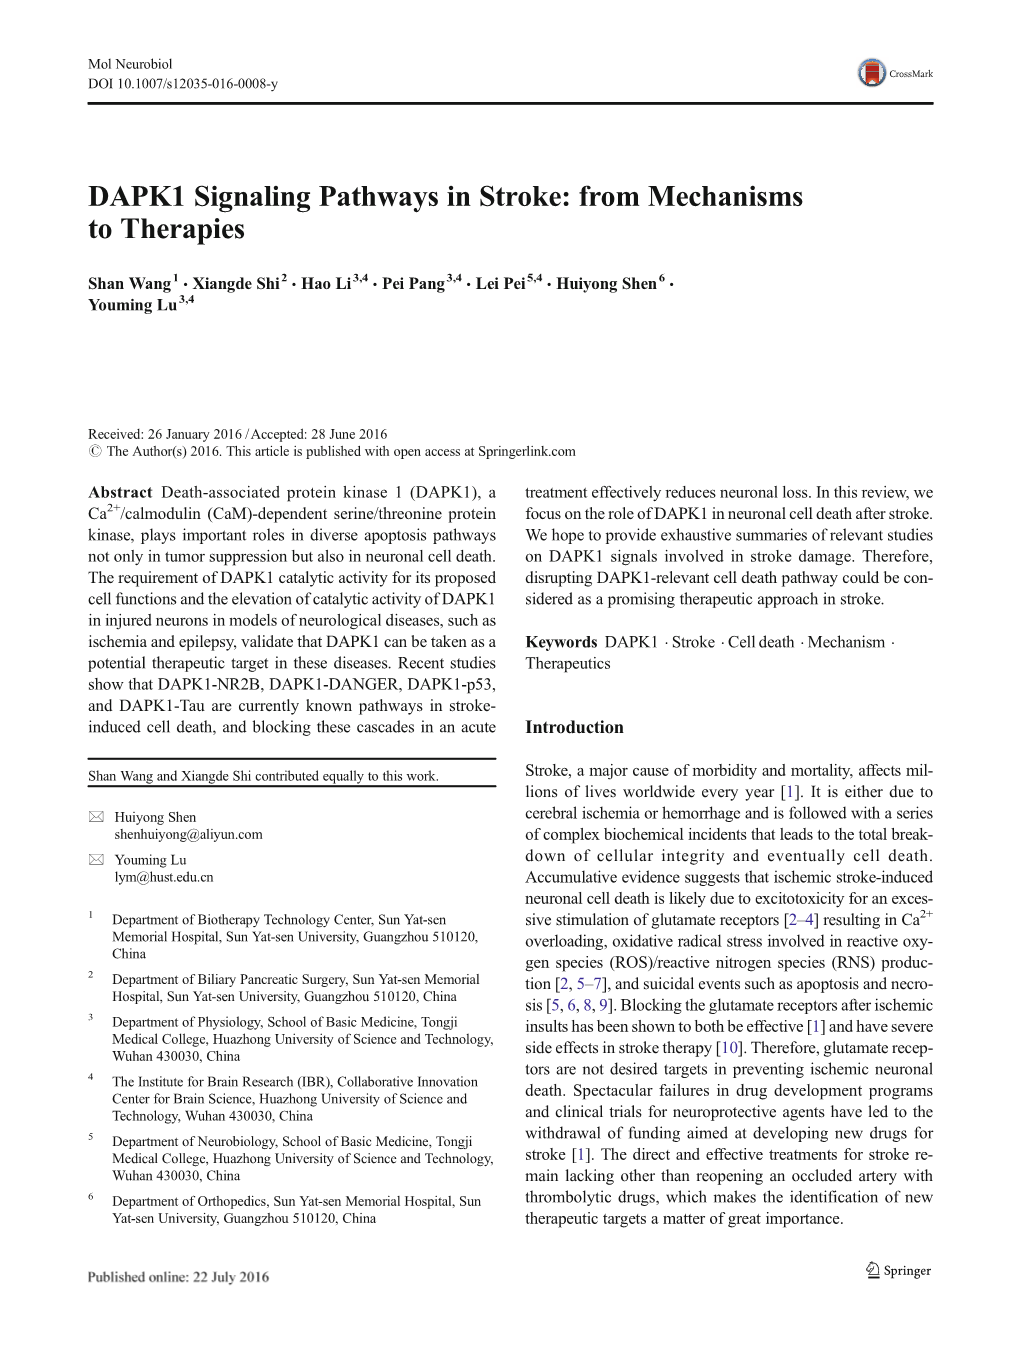 DAPK1 Signaling Pathways in Stroke: from Mechanisms to Therapies